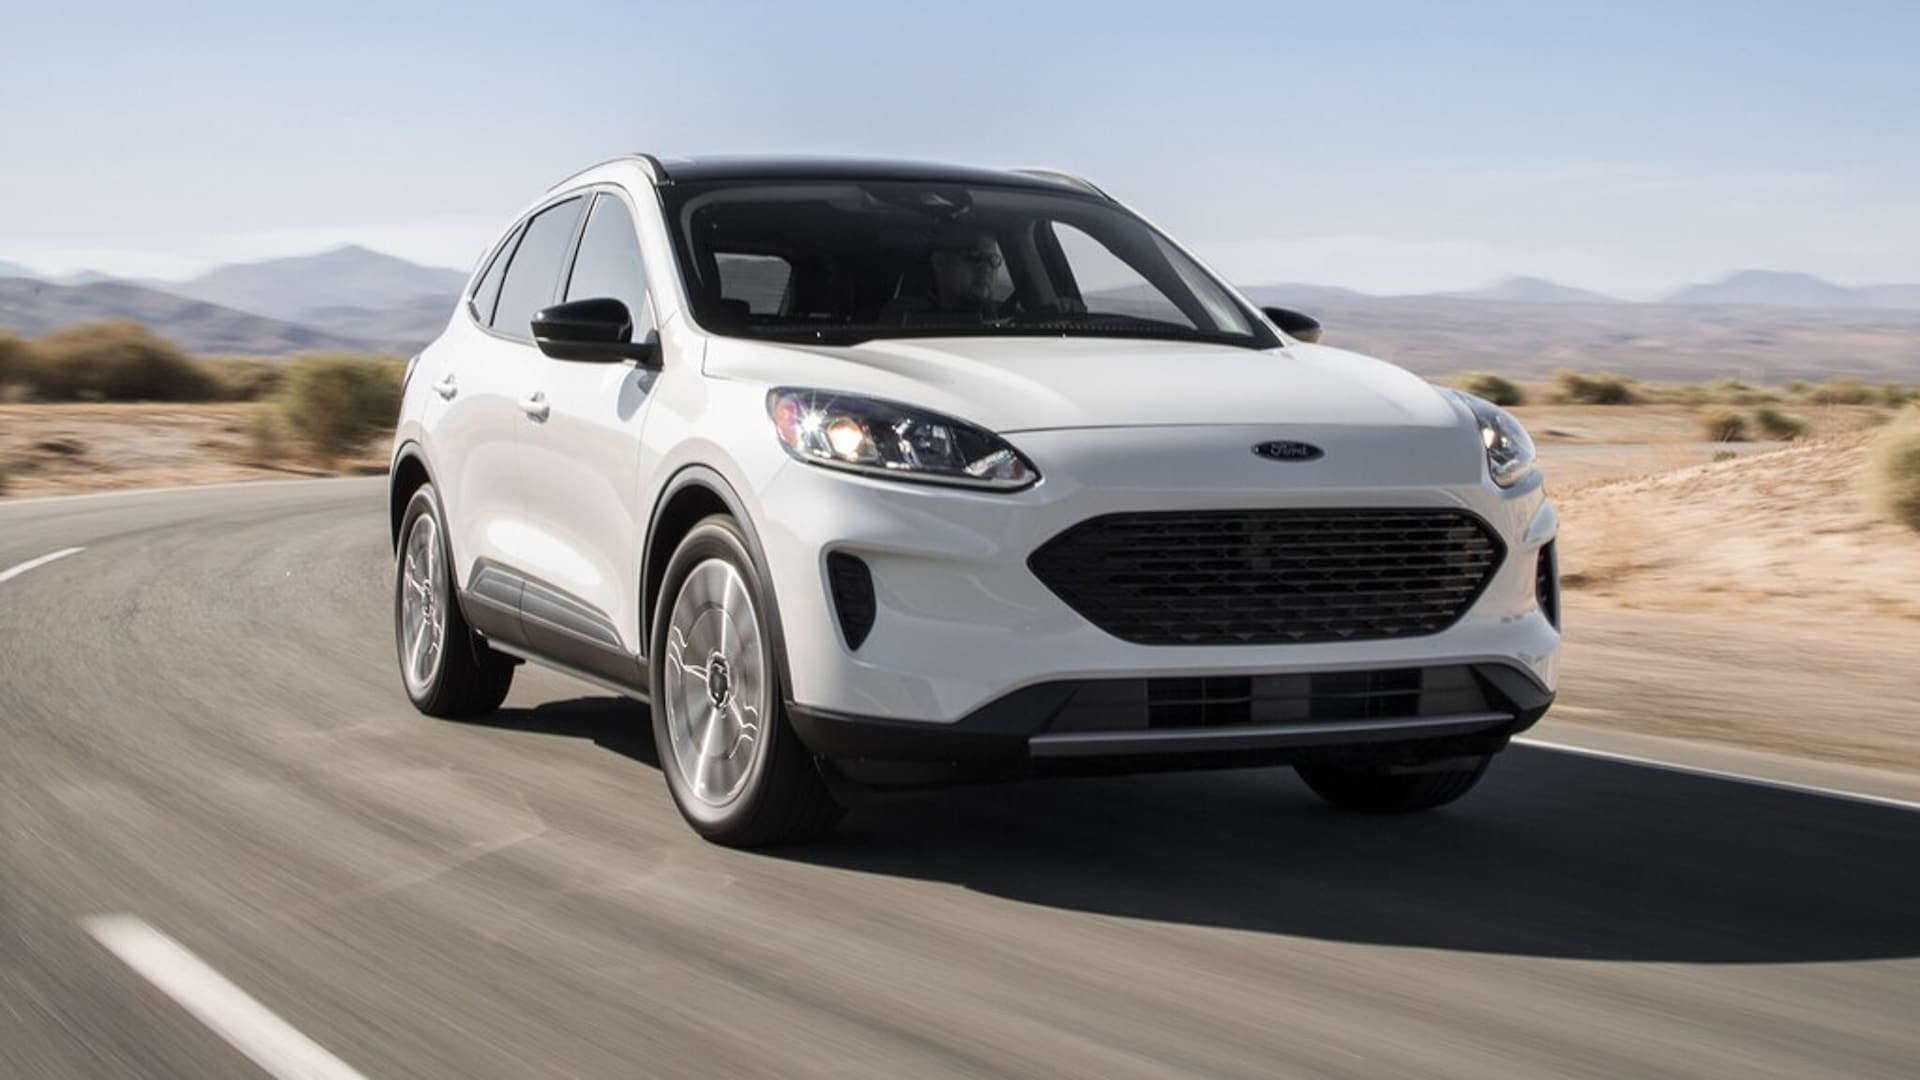 2022 Ford Escape Hybrid Prices, Reviews, and Photos - MotorTrend